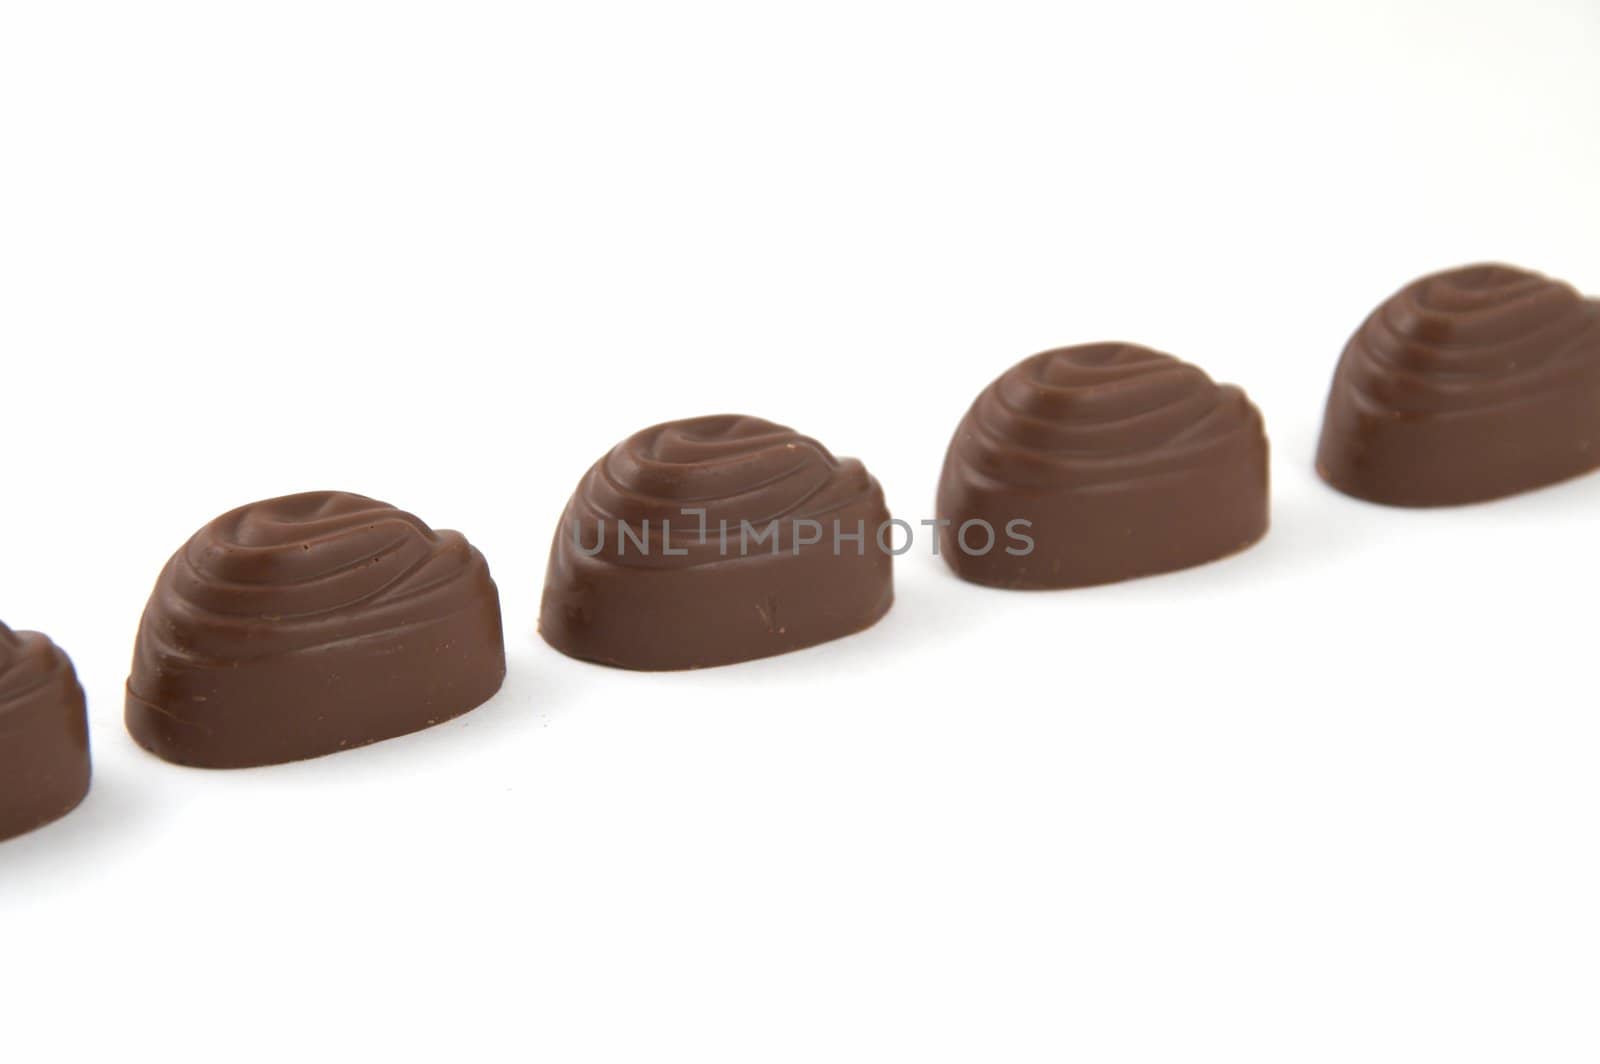 Sweets chocolate with a stuffing, on a white background